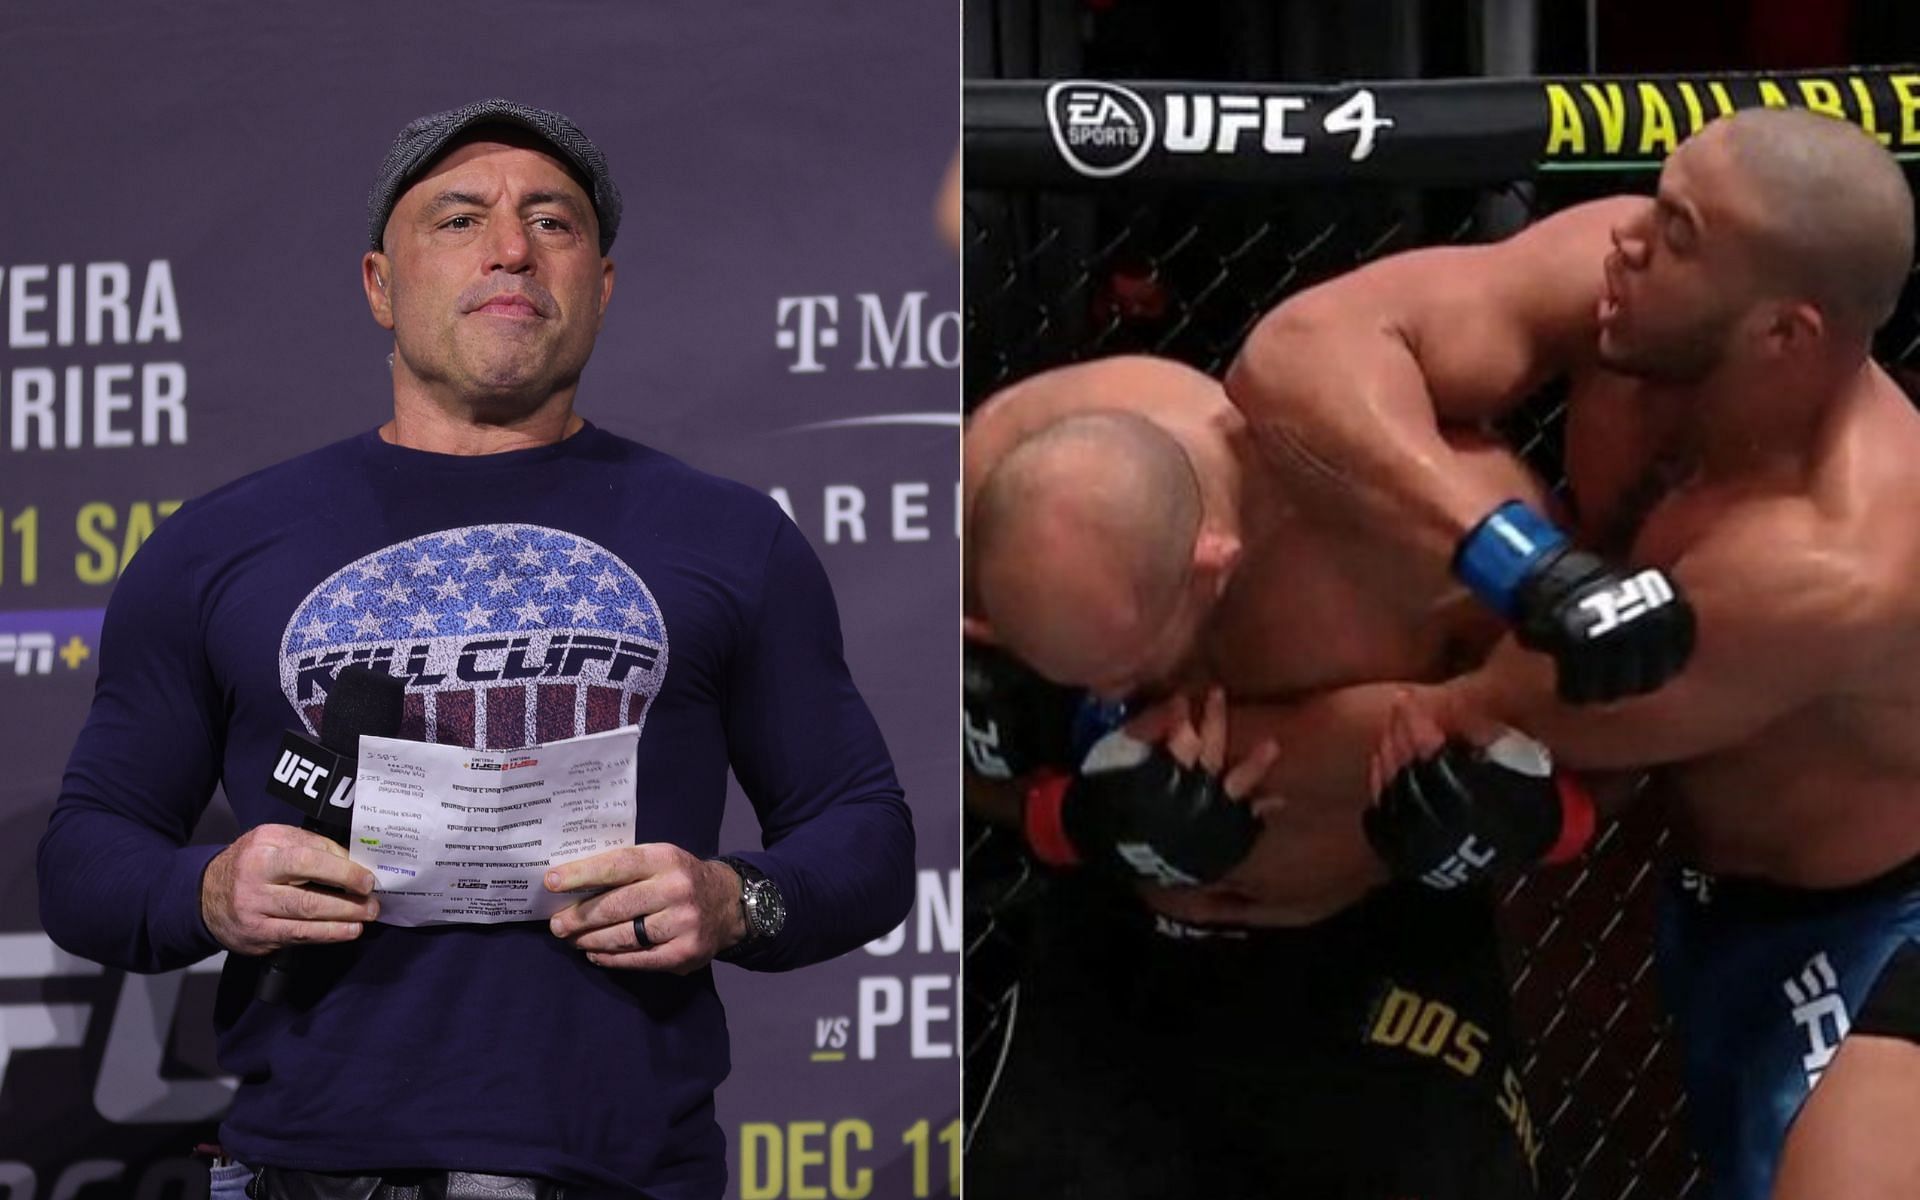 Joe Rogan (left) and Ciryl Gane elbowing Junior dos Santos (right) (Image credits Getty Images and @ULTFightfans on Twitter)